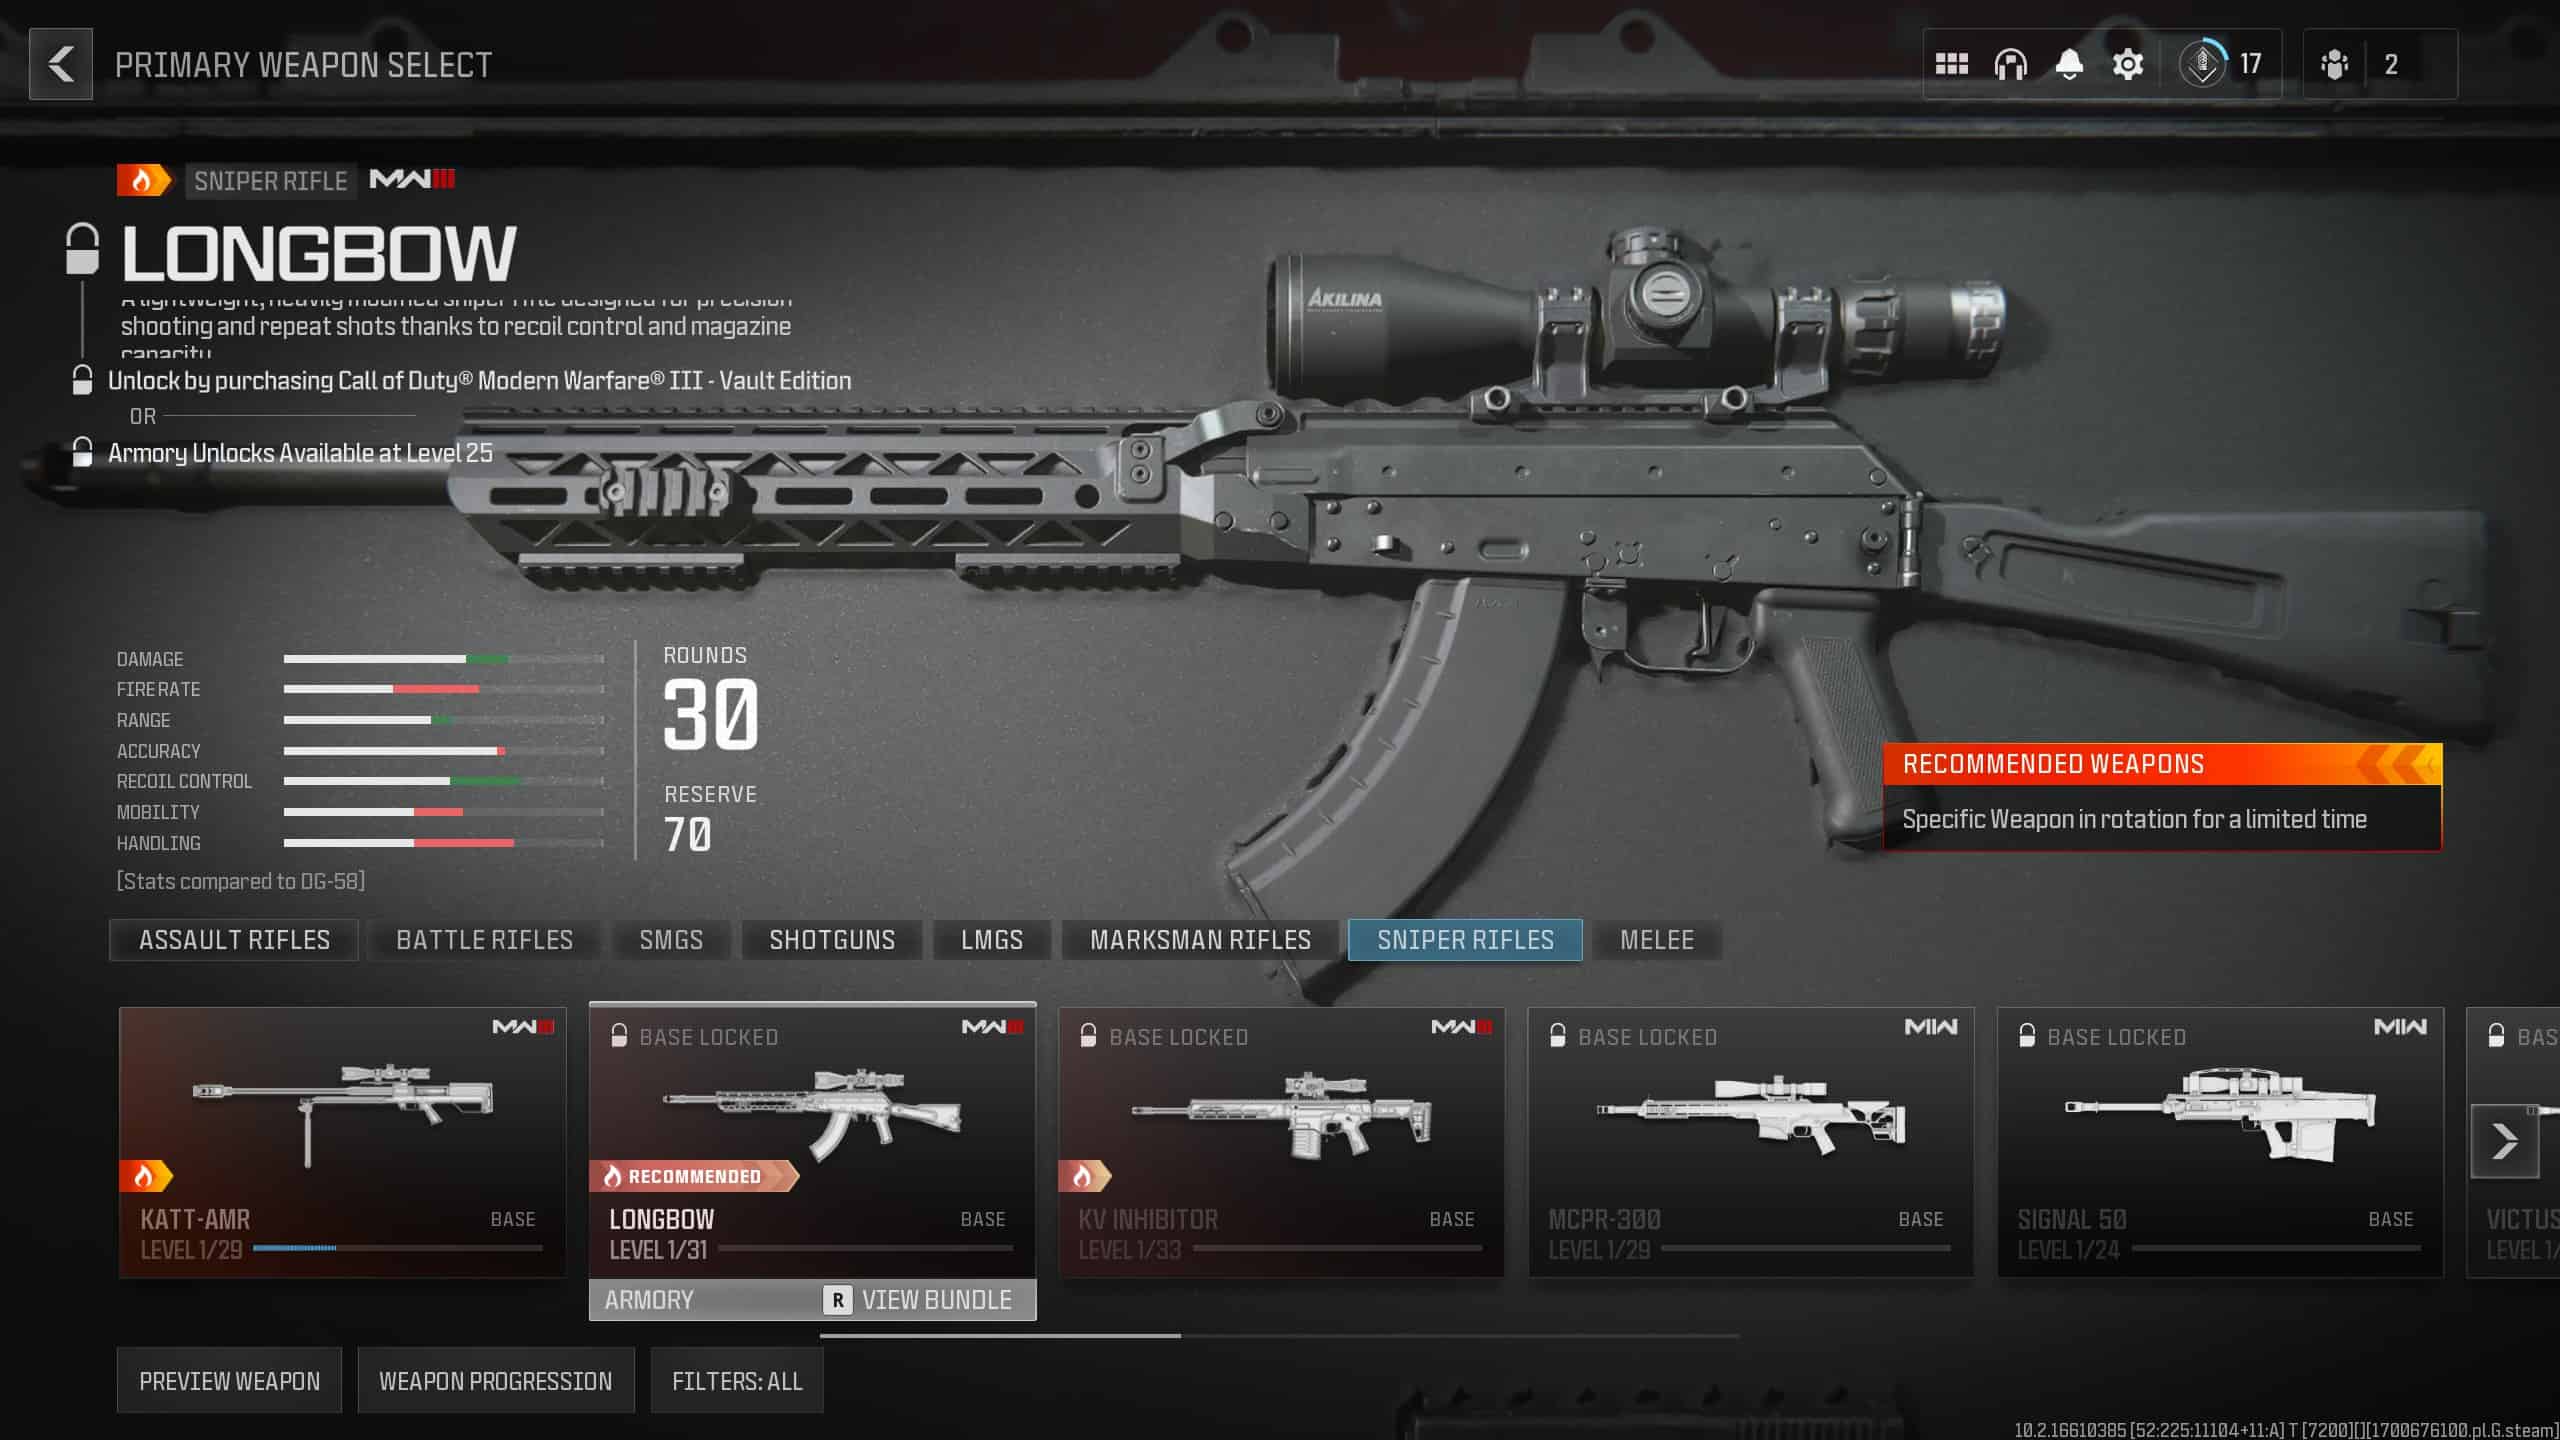 The Longbow stands out thanks to its large magazine in MW3. Image captured by VideoGamer.